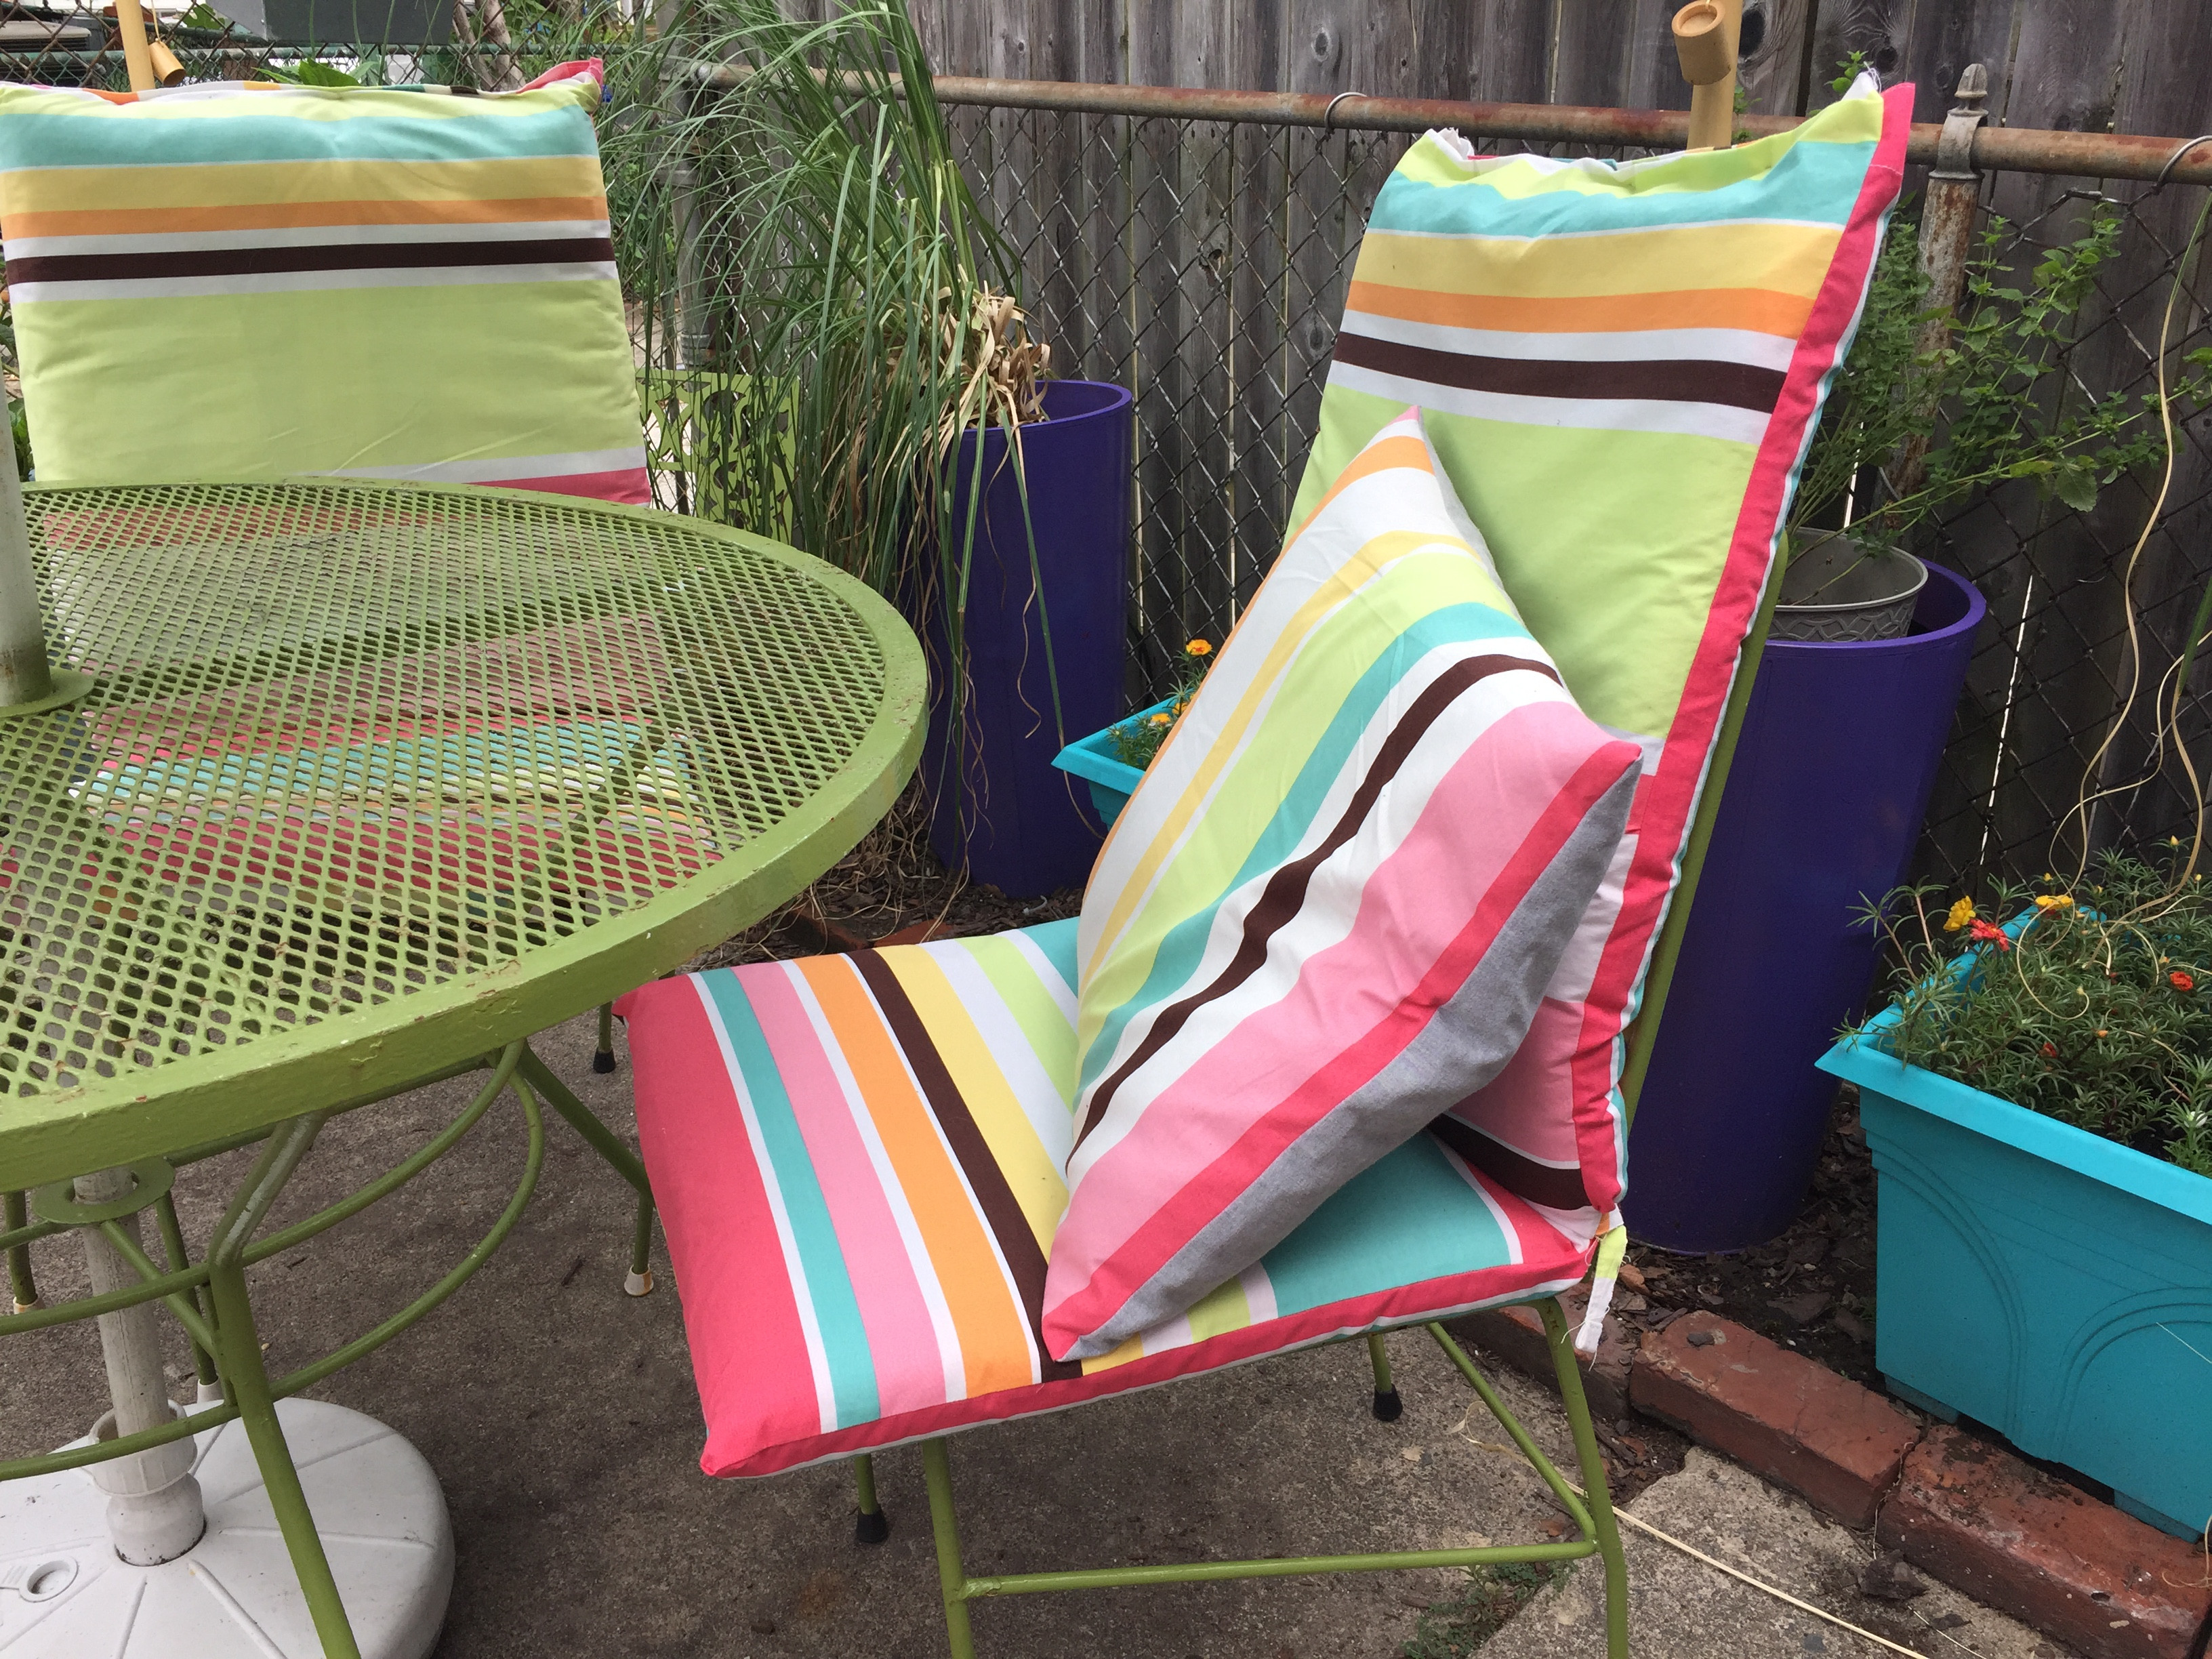 DIY Outdoor Cushions Using Shower Curtain
 Weekend DIY Turn an Old Shower Curtain into Super Cute